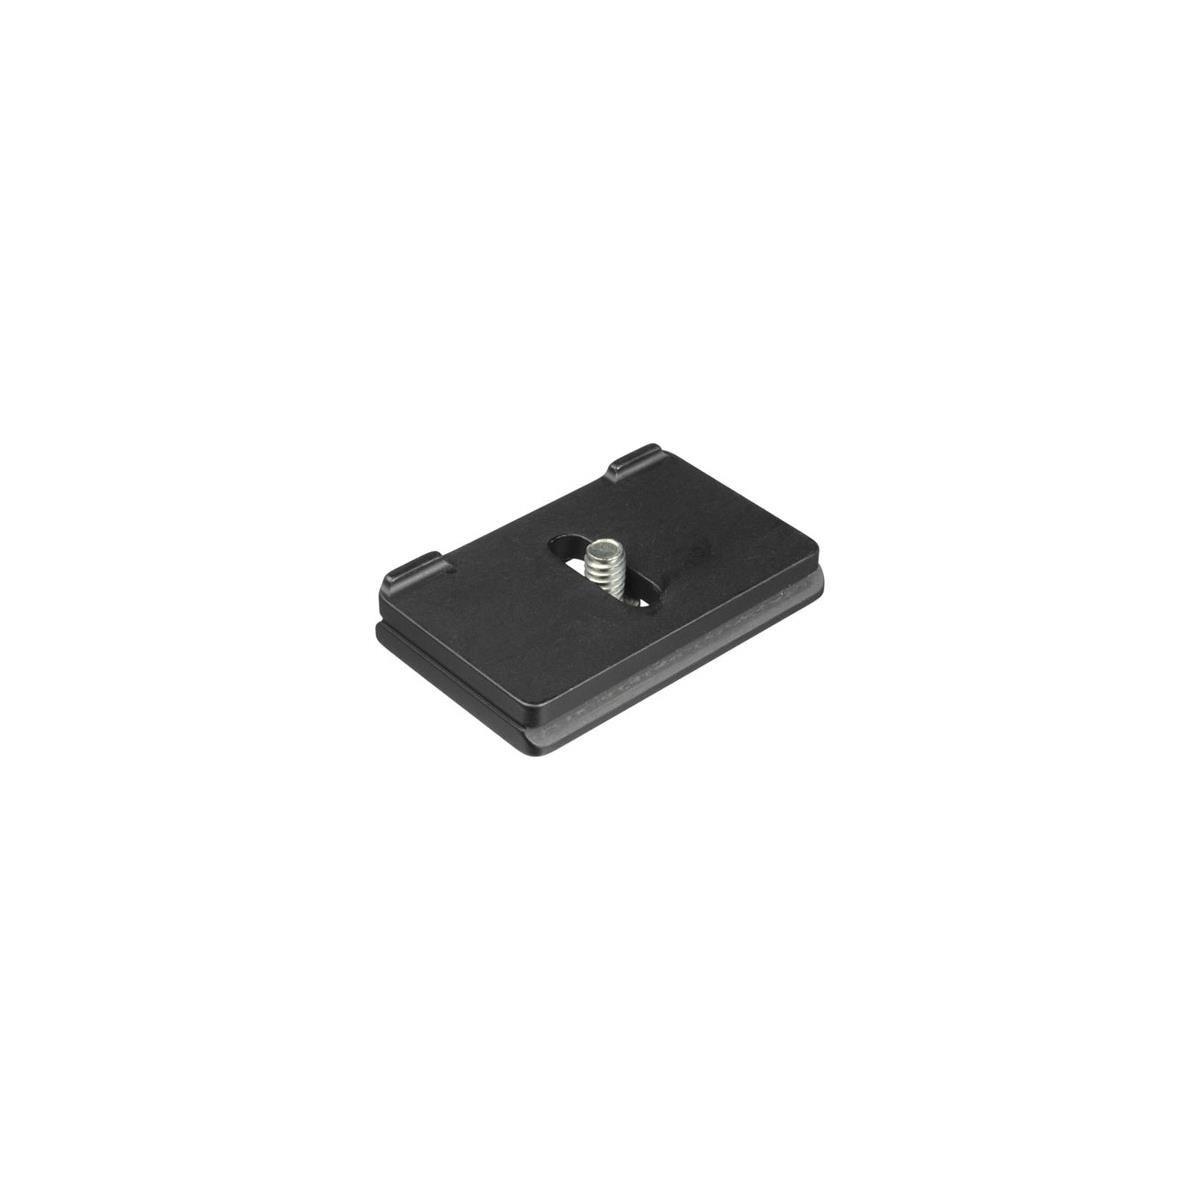 Image of Acratech Arca-Type Quick Release Plate for Nikon D600 Camera